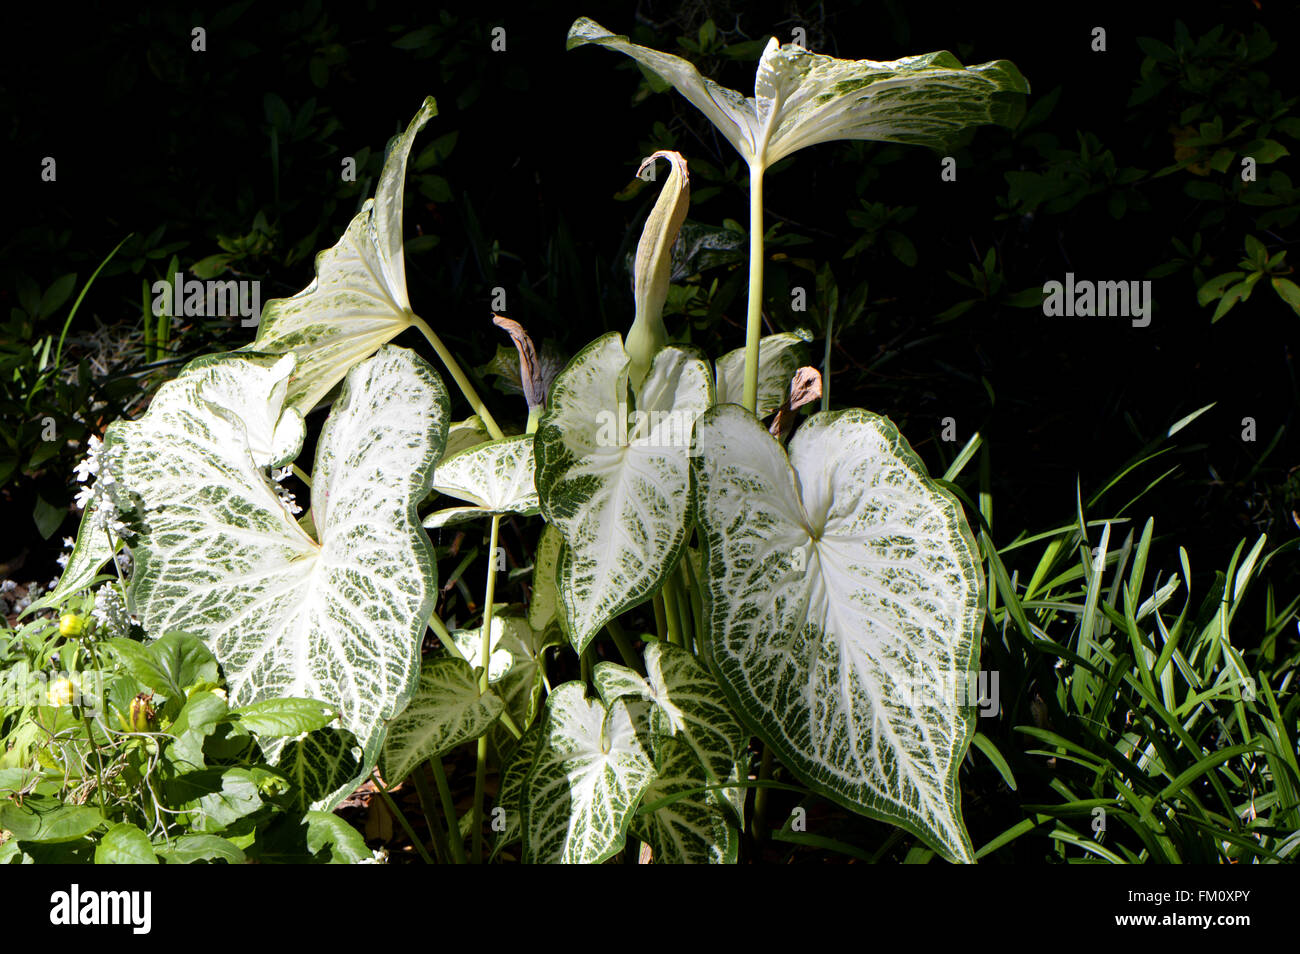 Angle wings Latin name Caladium bicolour. A decorative plant with white and green leaves. Stock Photo